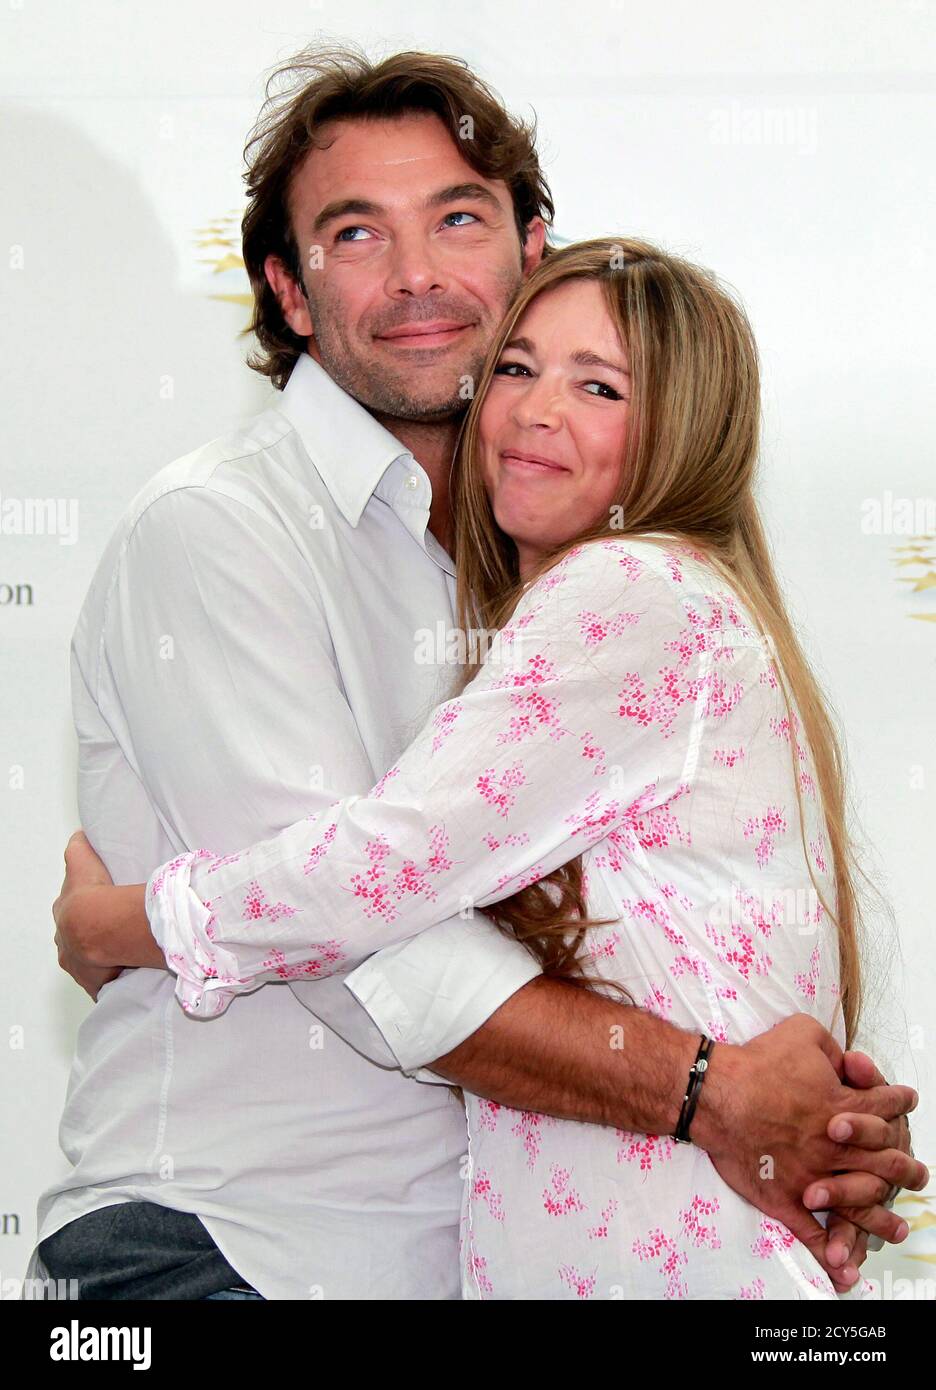 Actors Patrick Puydebat and Helene Rolles who star in the television series  'Les Mysteres De L'amour' pose during a photocall at the 51st Monte Carlo  television festival in Monaco June 9, 2011.